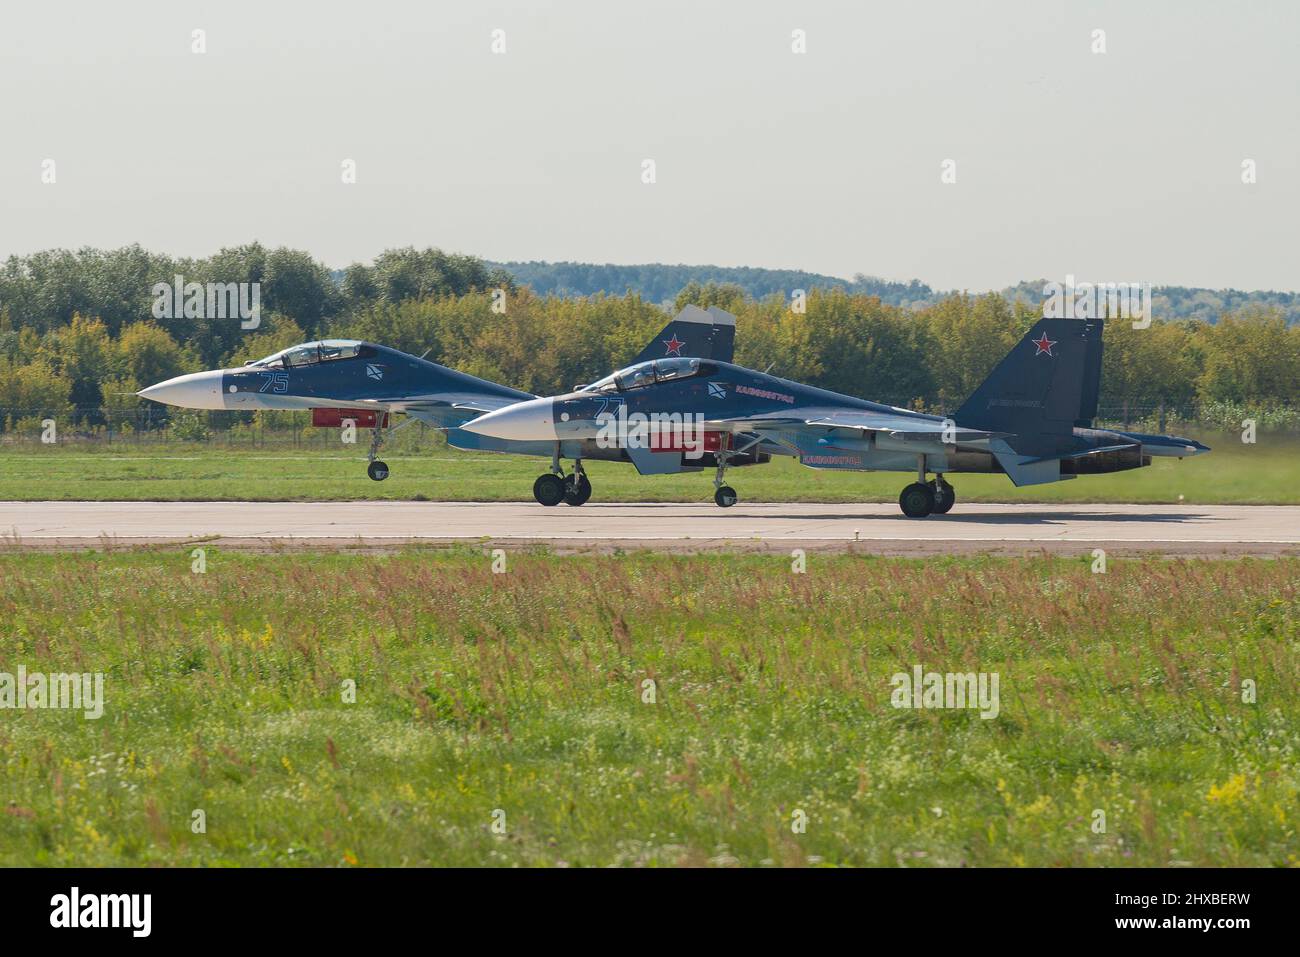 ZHUKOVSKY, RUSSIA - AUGUST 30, 2019: Two Russian heavy multi-purpose Su-30SM fighters on the runway on a sunny day Stock Photo